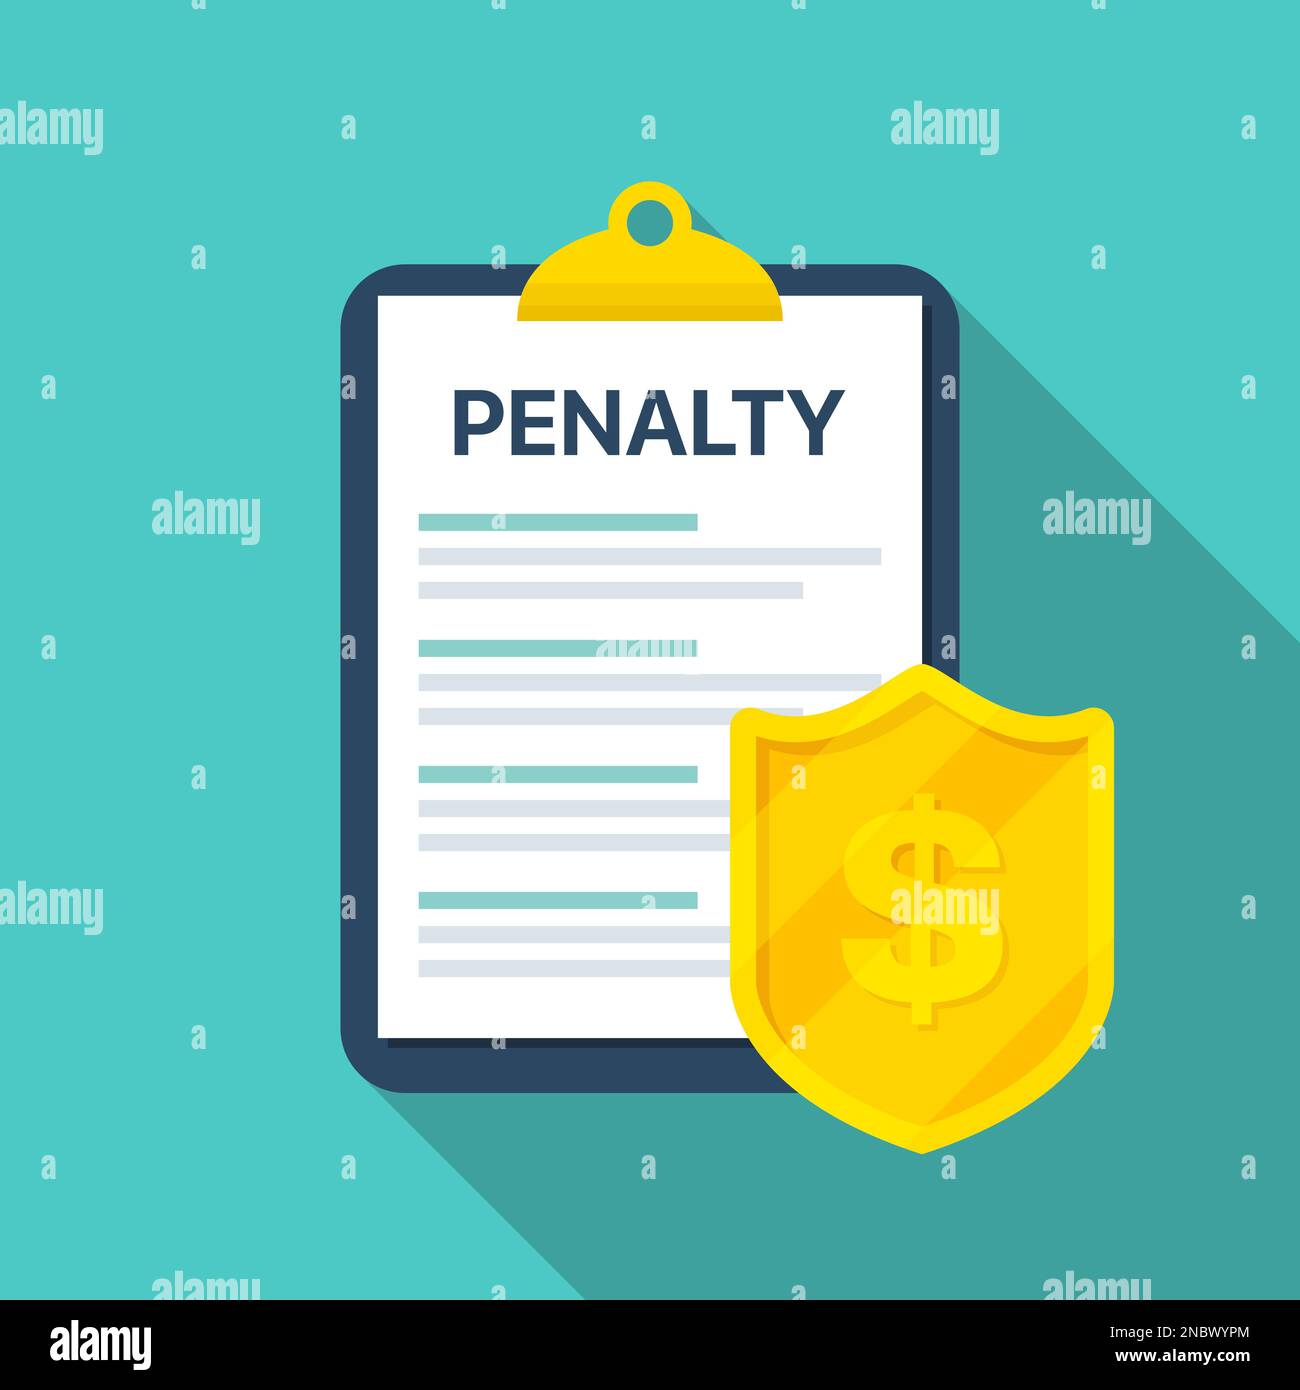 Penalty document with money shield in a flat design Stock Vector